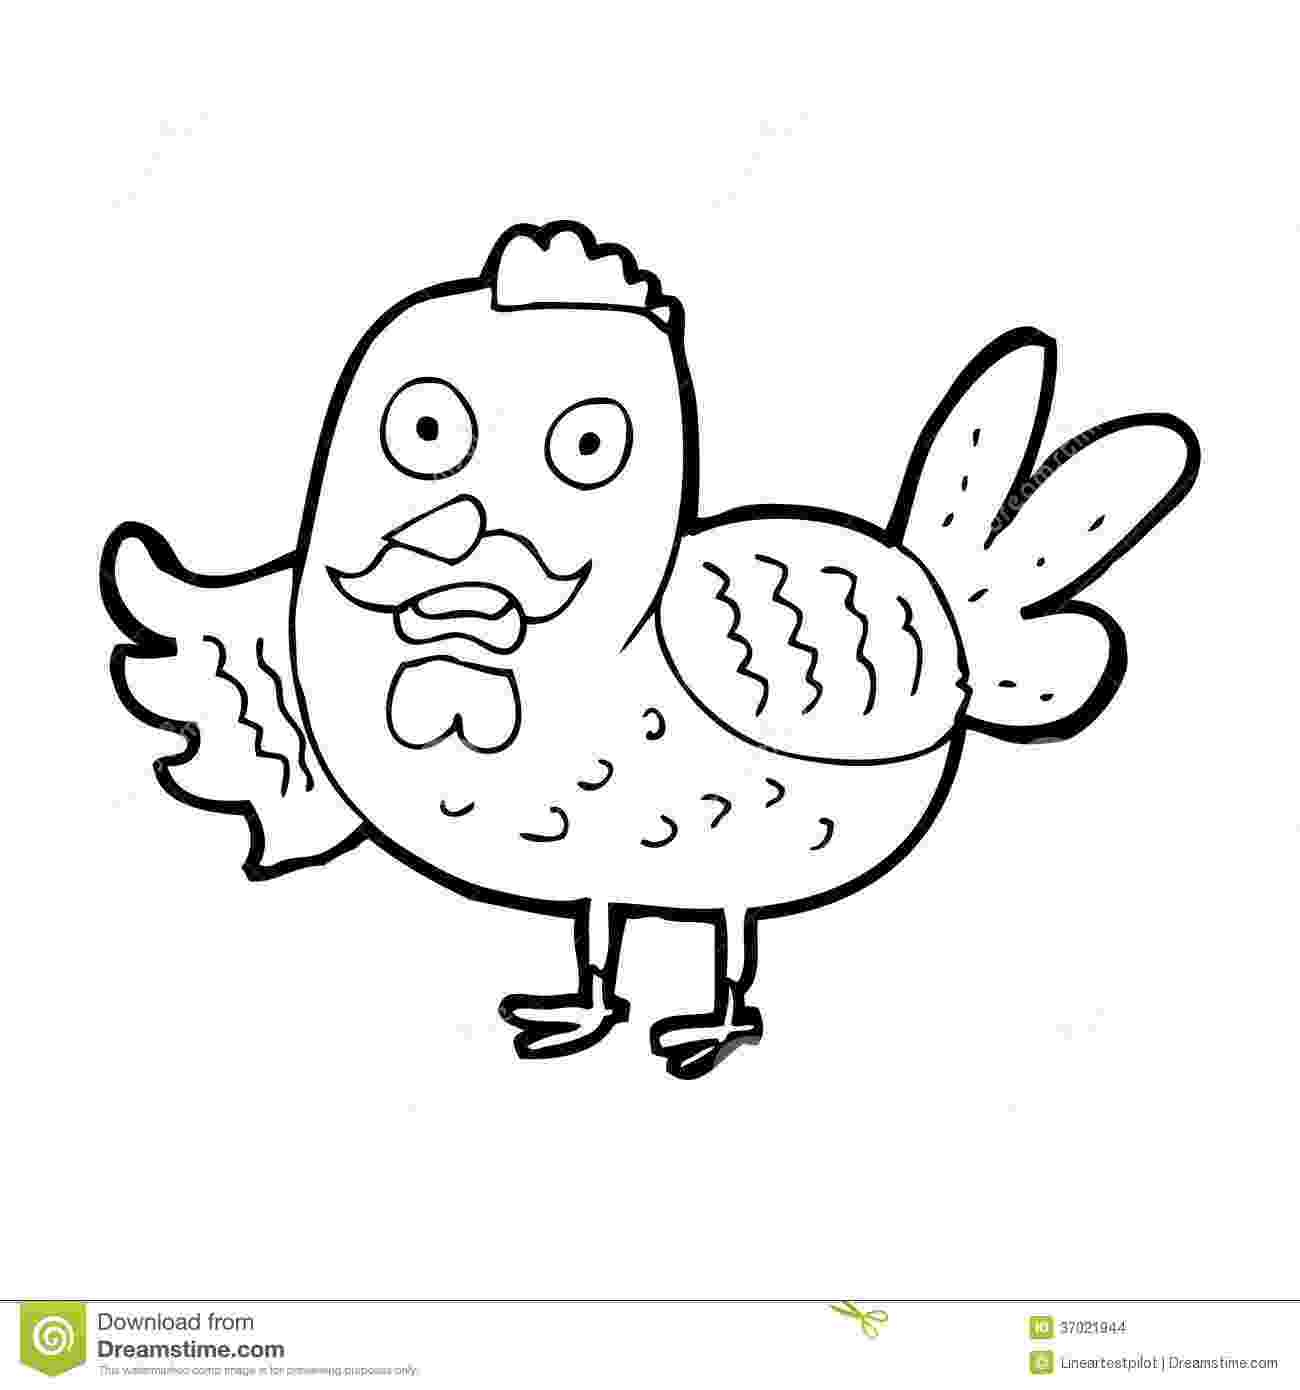 cartoon rooster cartoon of a rooster royalty free vector clipart by rooster cartoon 